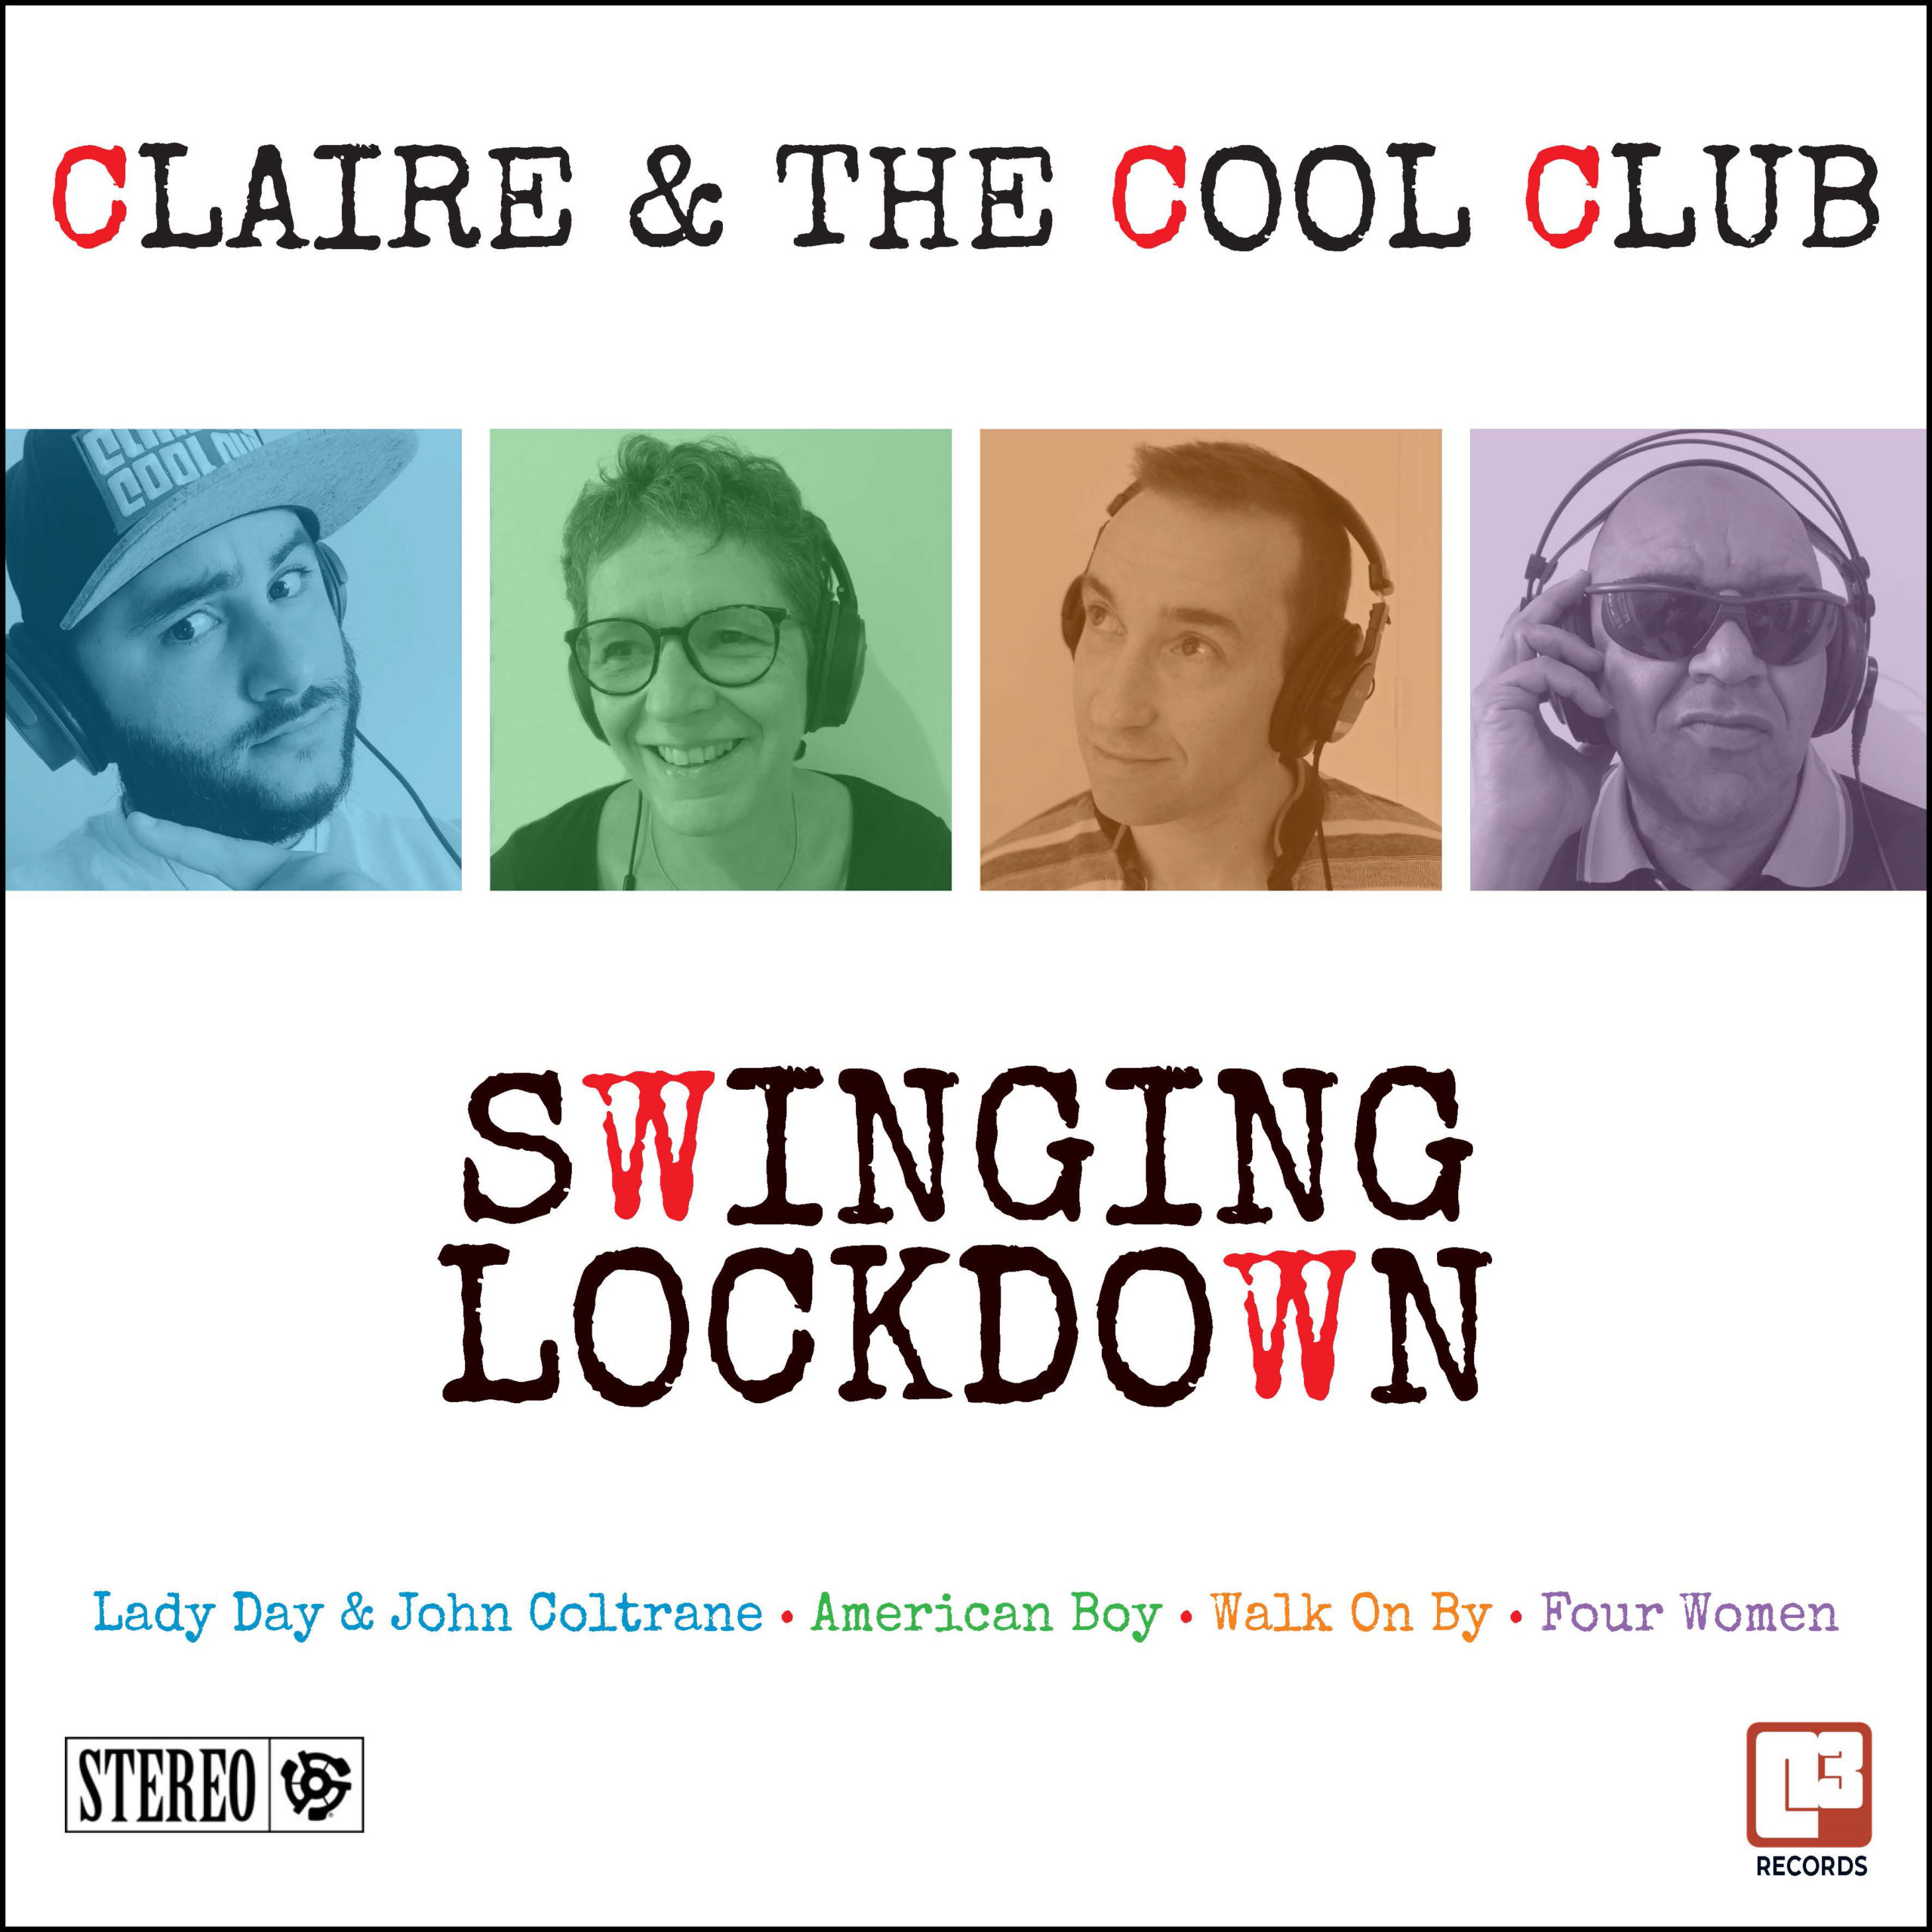 Claire and the Cool Club - Swinging Lockdown EP